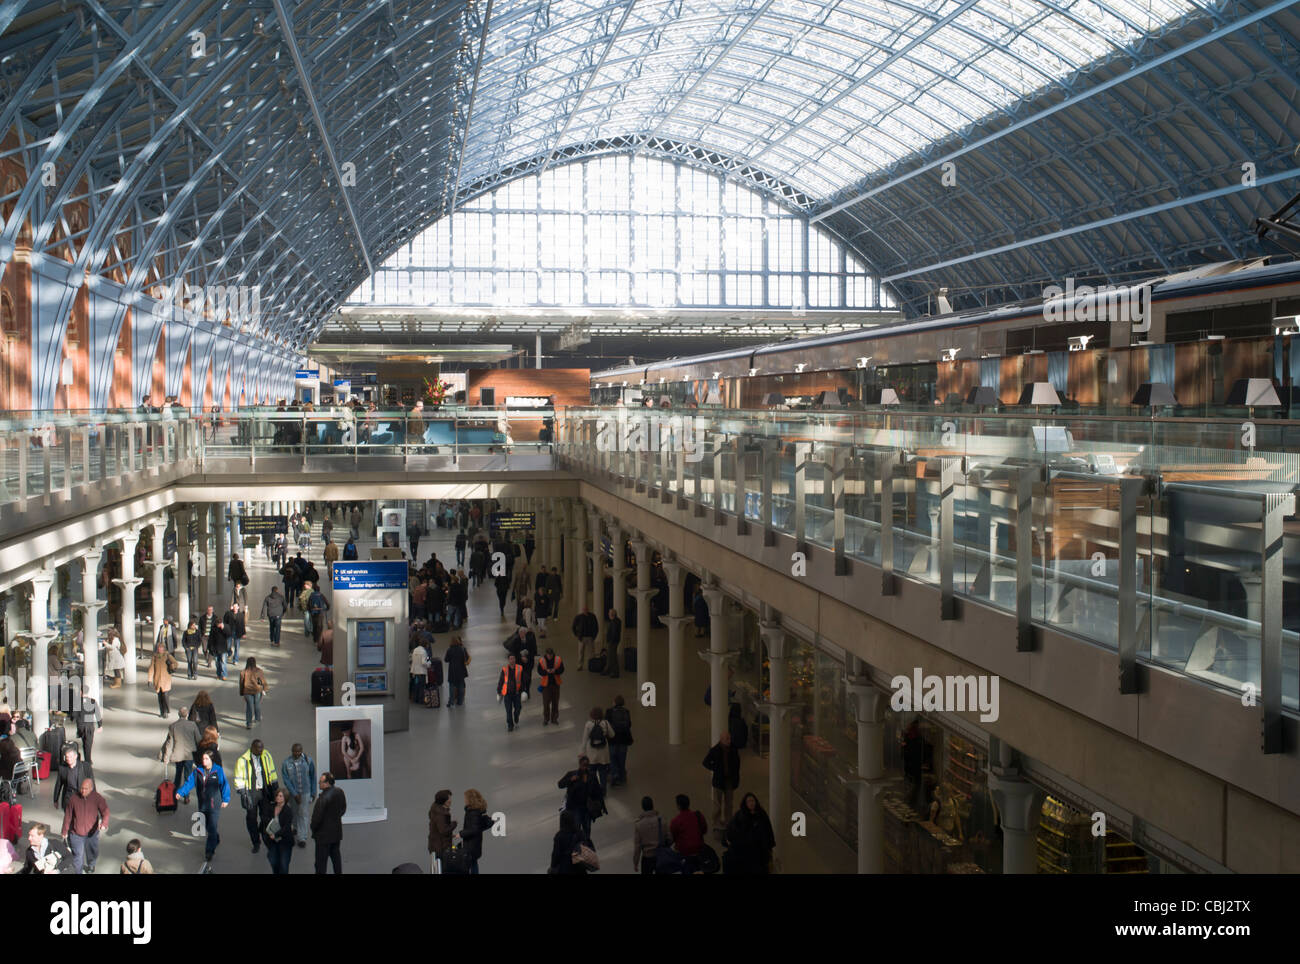 The interior of St. Pancras station, with Eurostar trains on the upper level in London, England, UK. Stock Photo